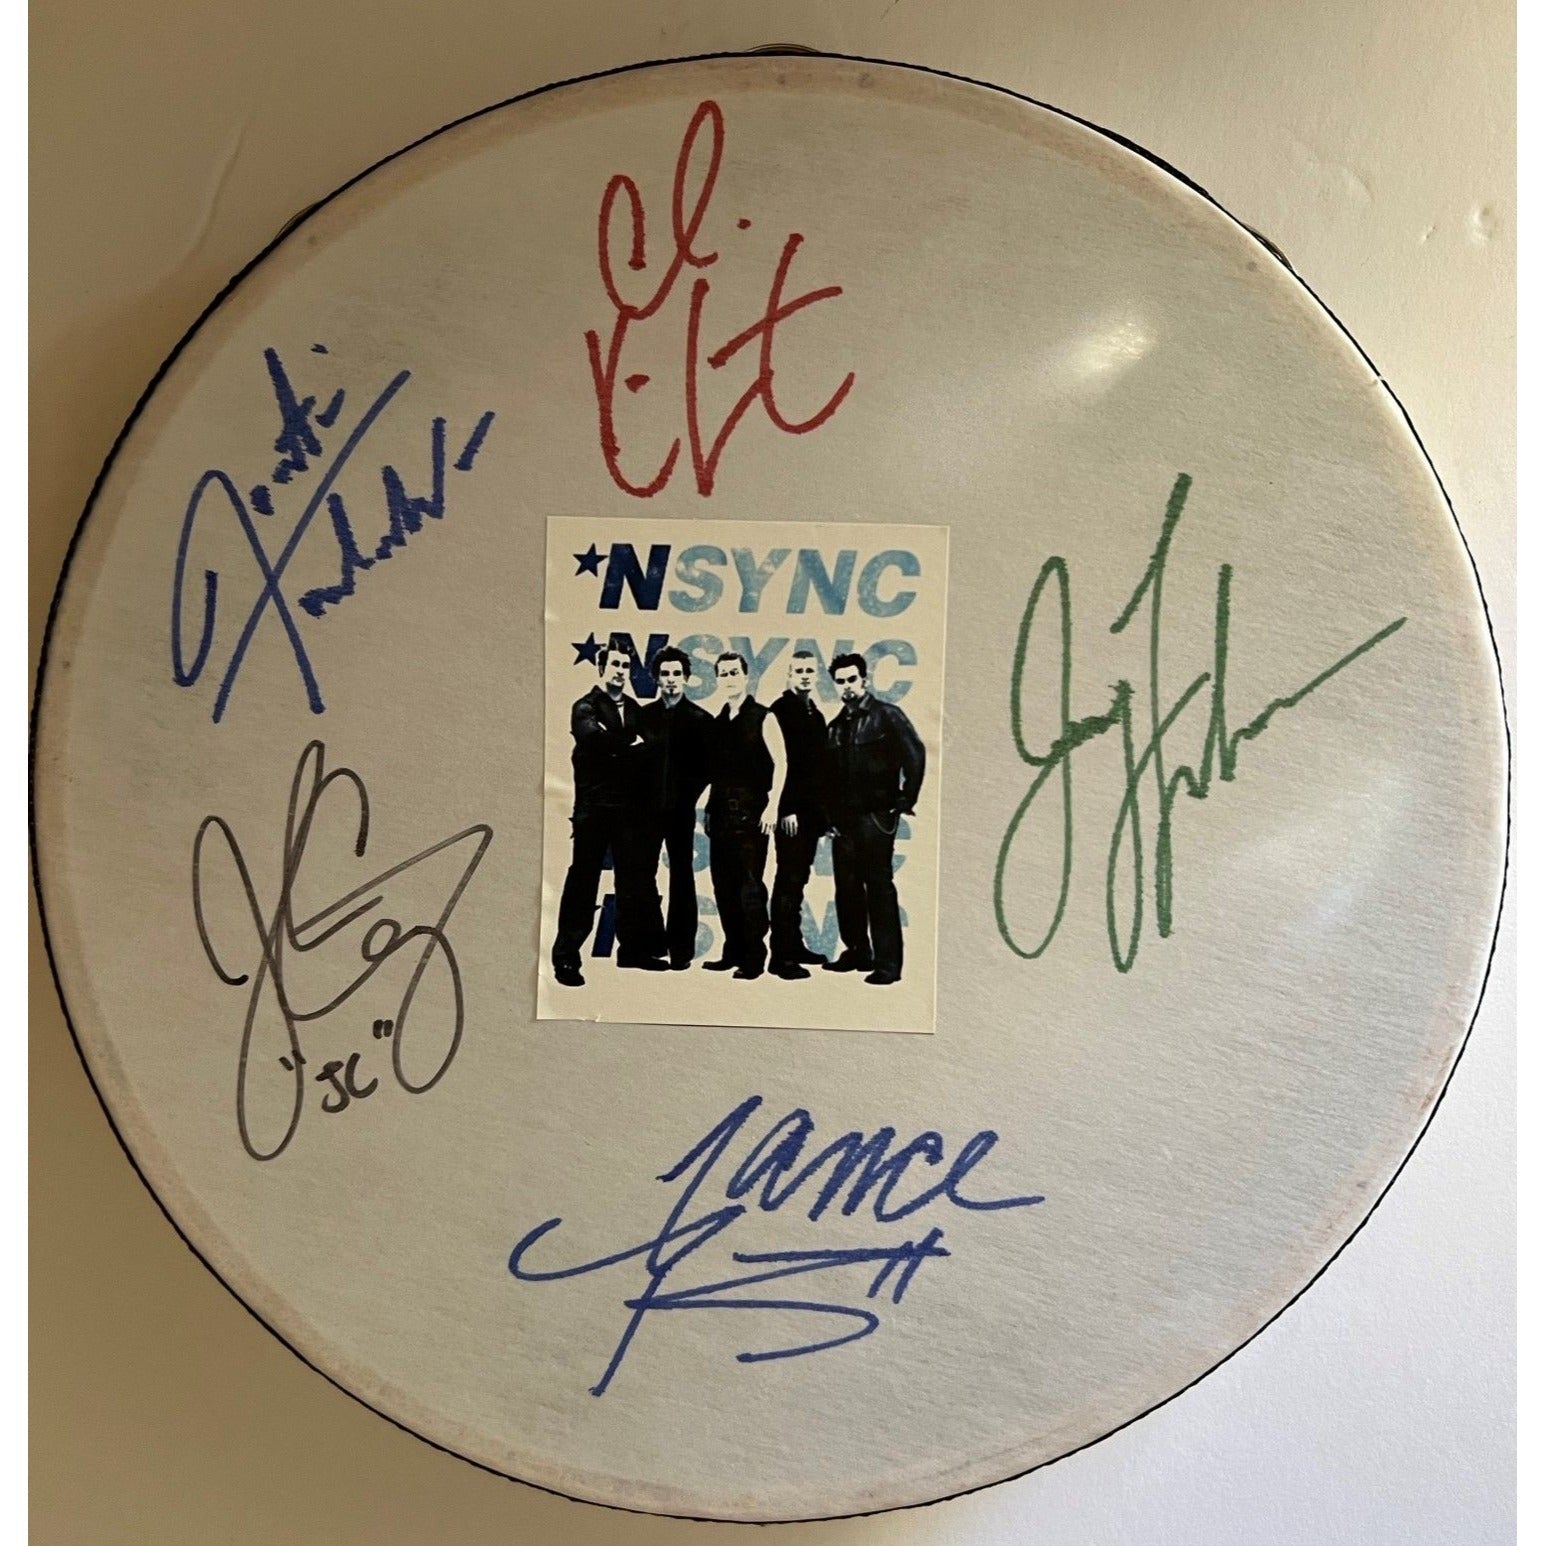 Justin Timberlake  Chris Kirkpatrick, Joey Fatone, Lance Bass and JC Chasez NSYNC 14-in tambourine signed with proof